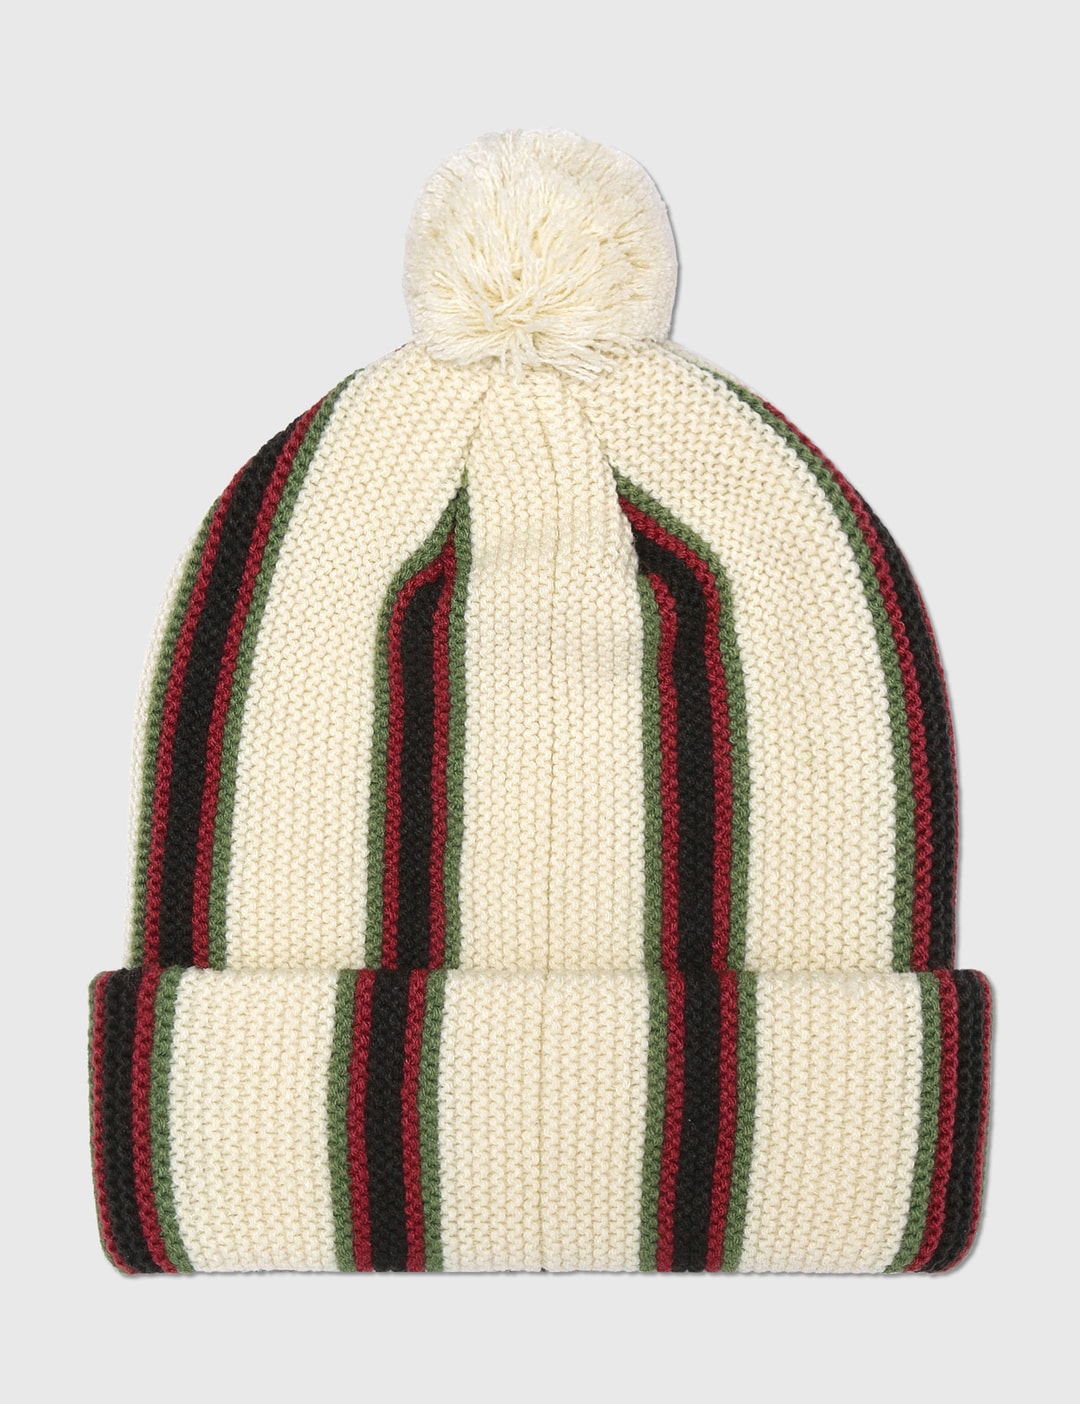 - Striped Pom Beanie | HBX - Globally Curated Fashion and Lifestyle by Hypebeast